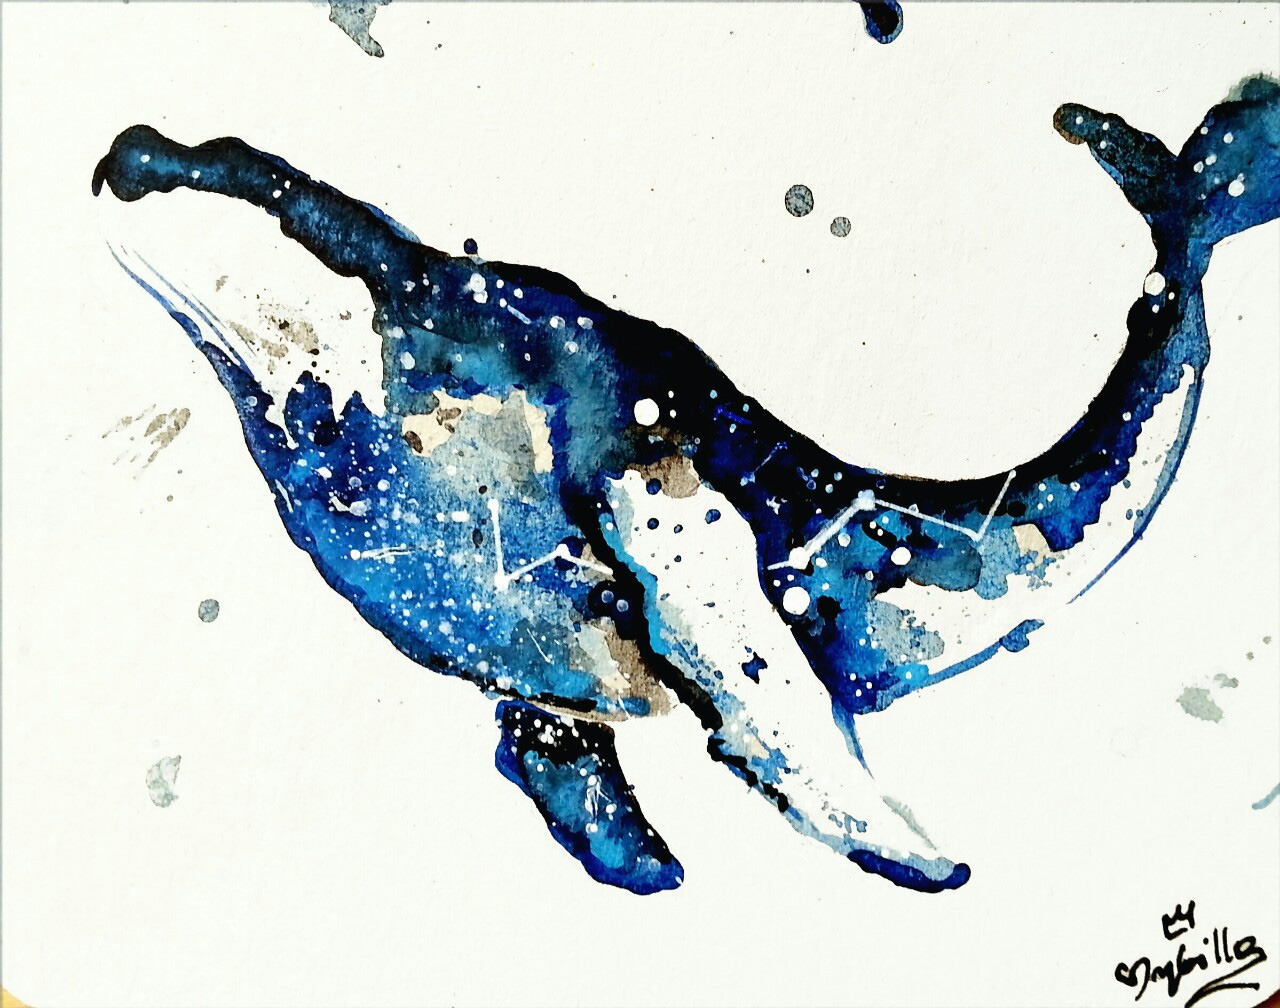 Whales need some space by Princess Sybilla.TUMBLR / FACEBOOK / SHOP